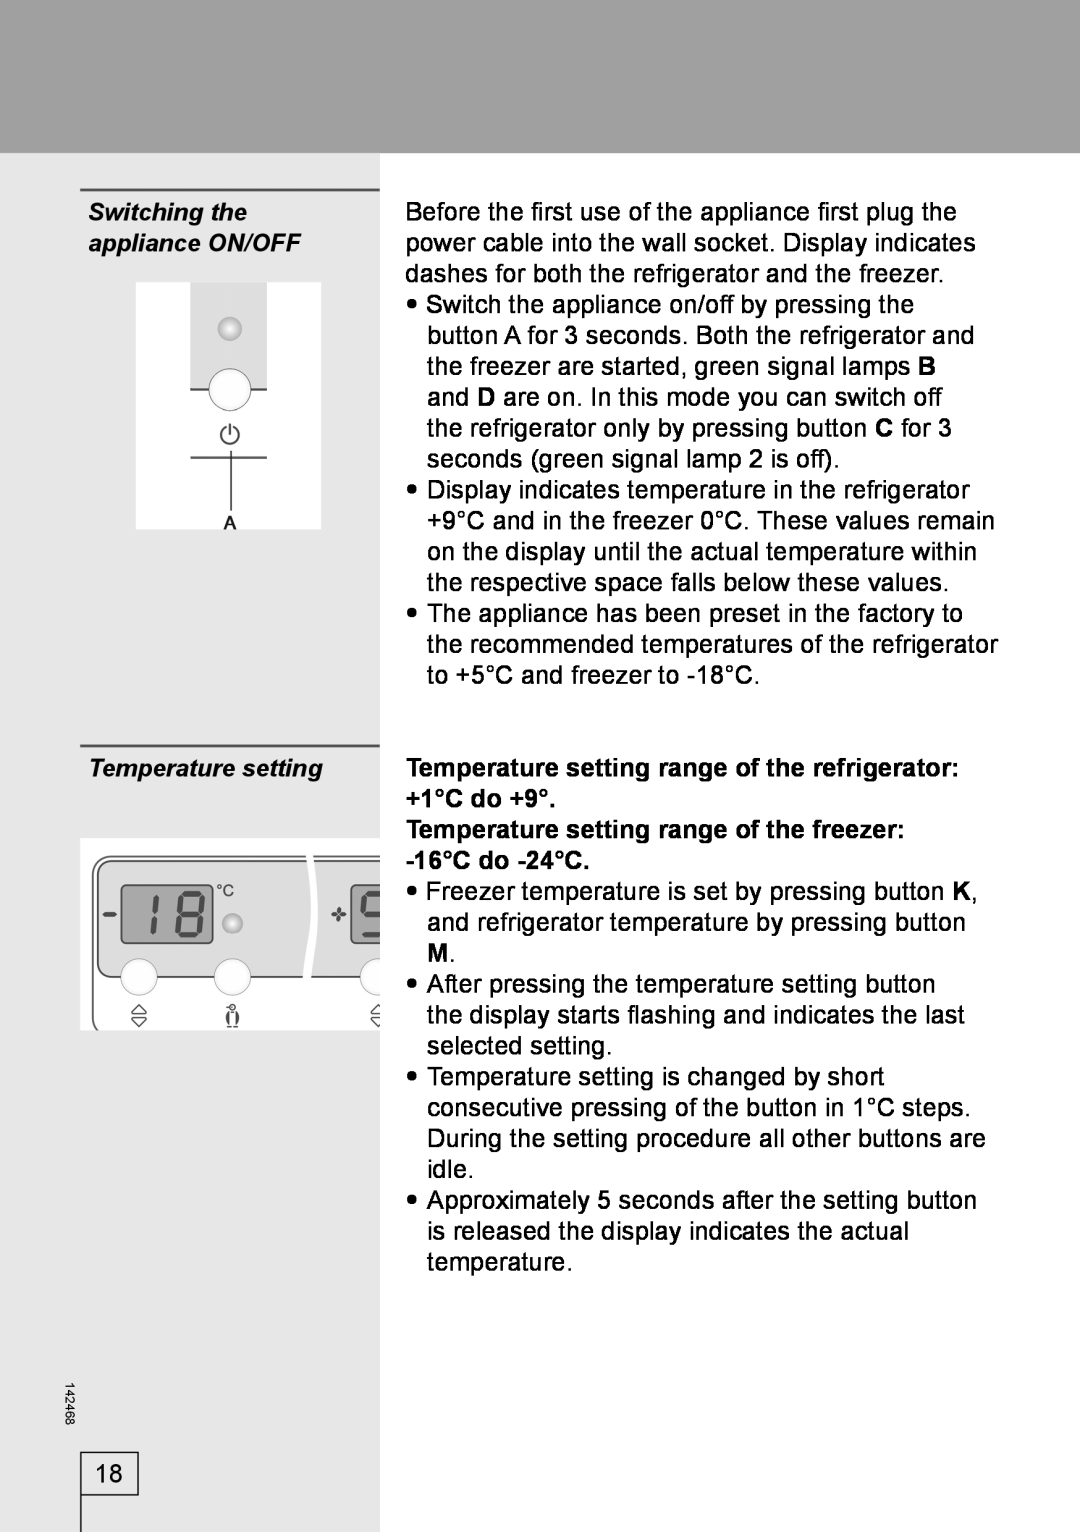 Smeg 142468 manual Temperature setting range of the freezer -16C do -24C, Switching the, appliance ON/OFF 